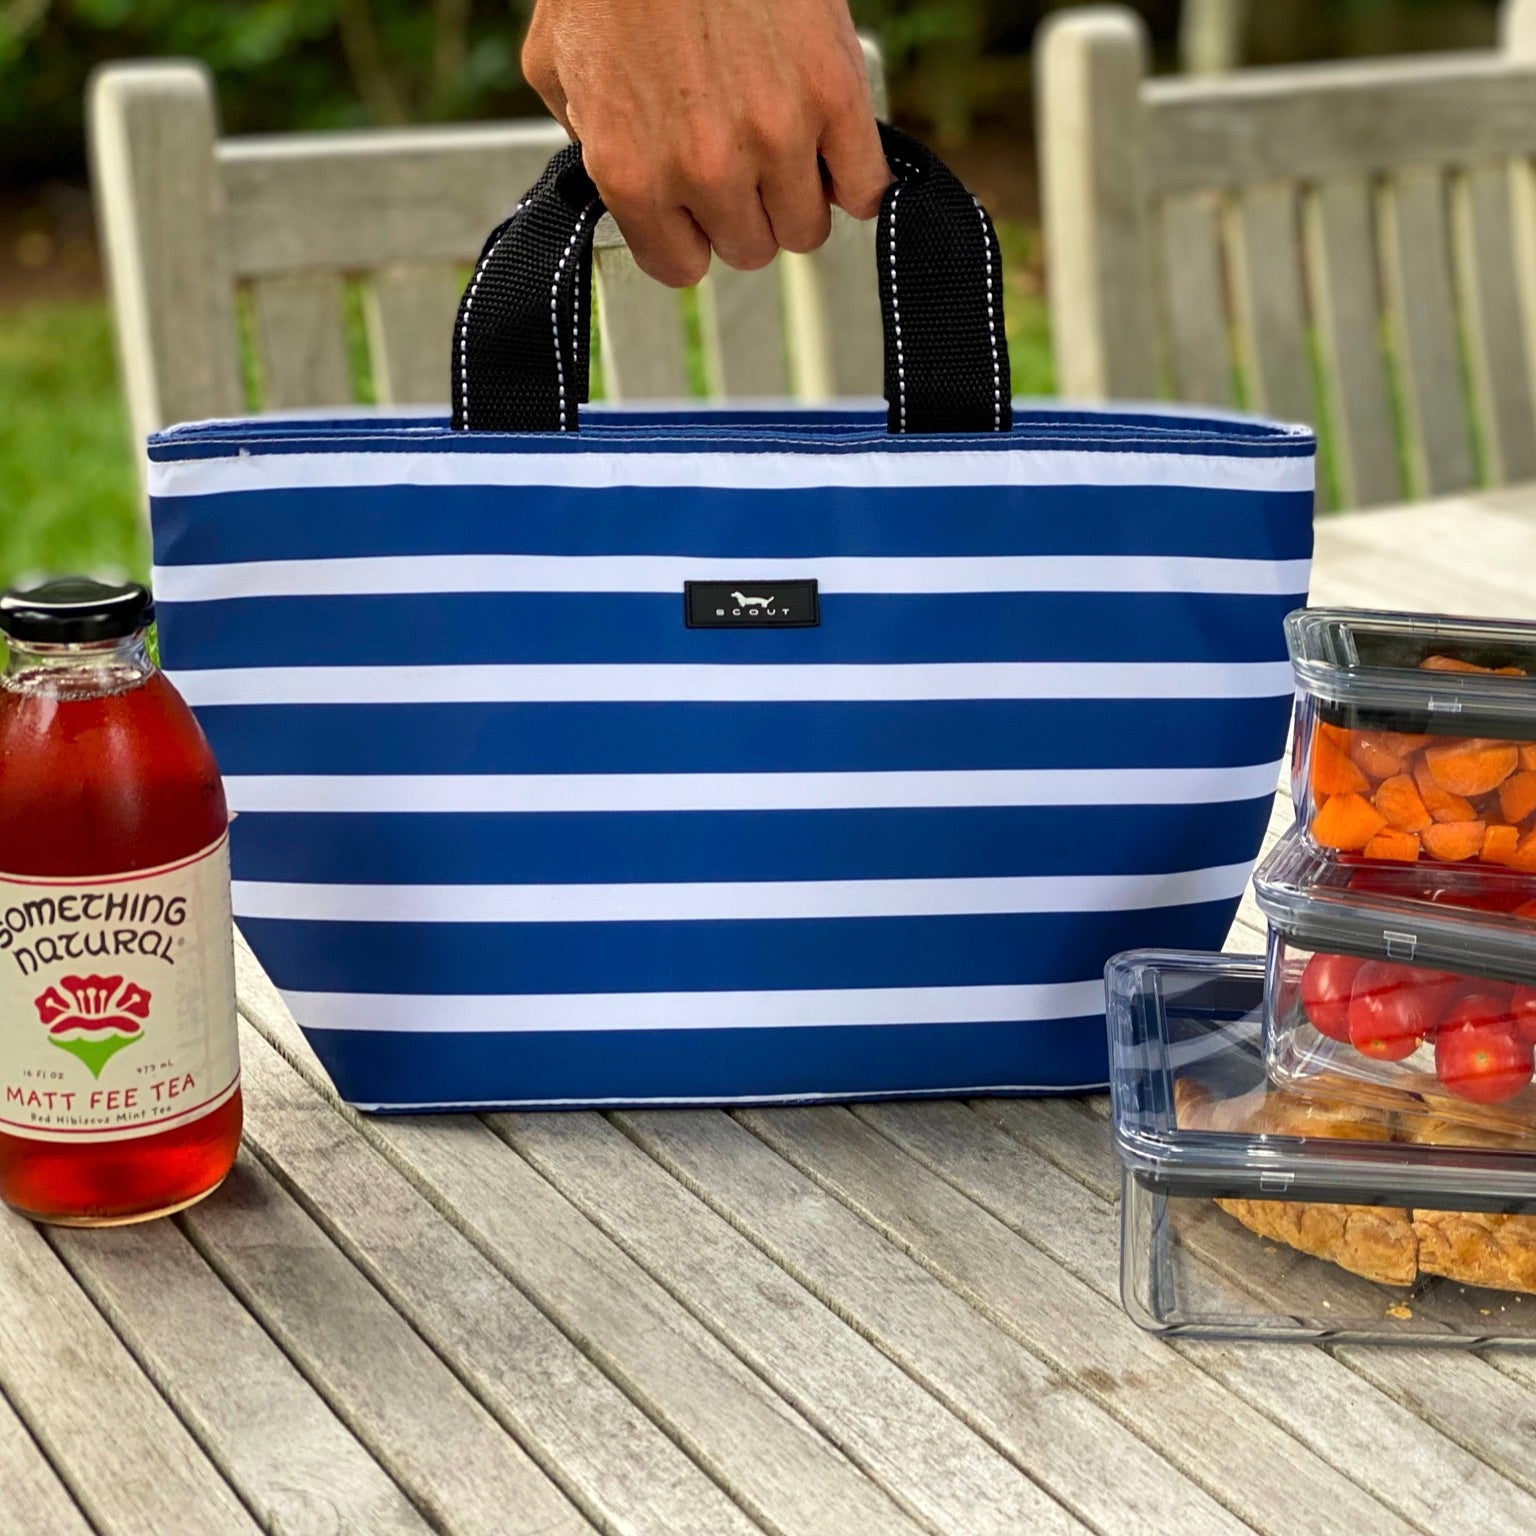 Best Lunch Boxes for Nurses